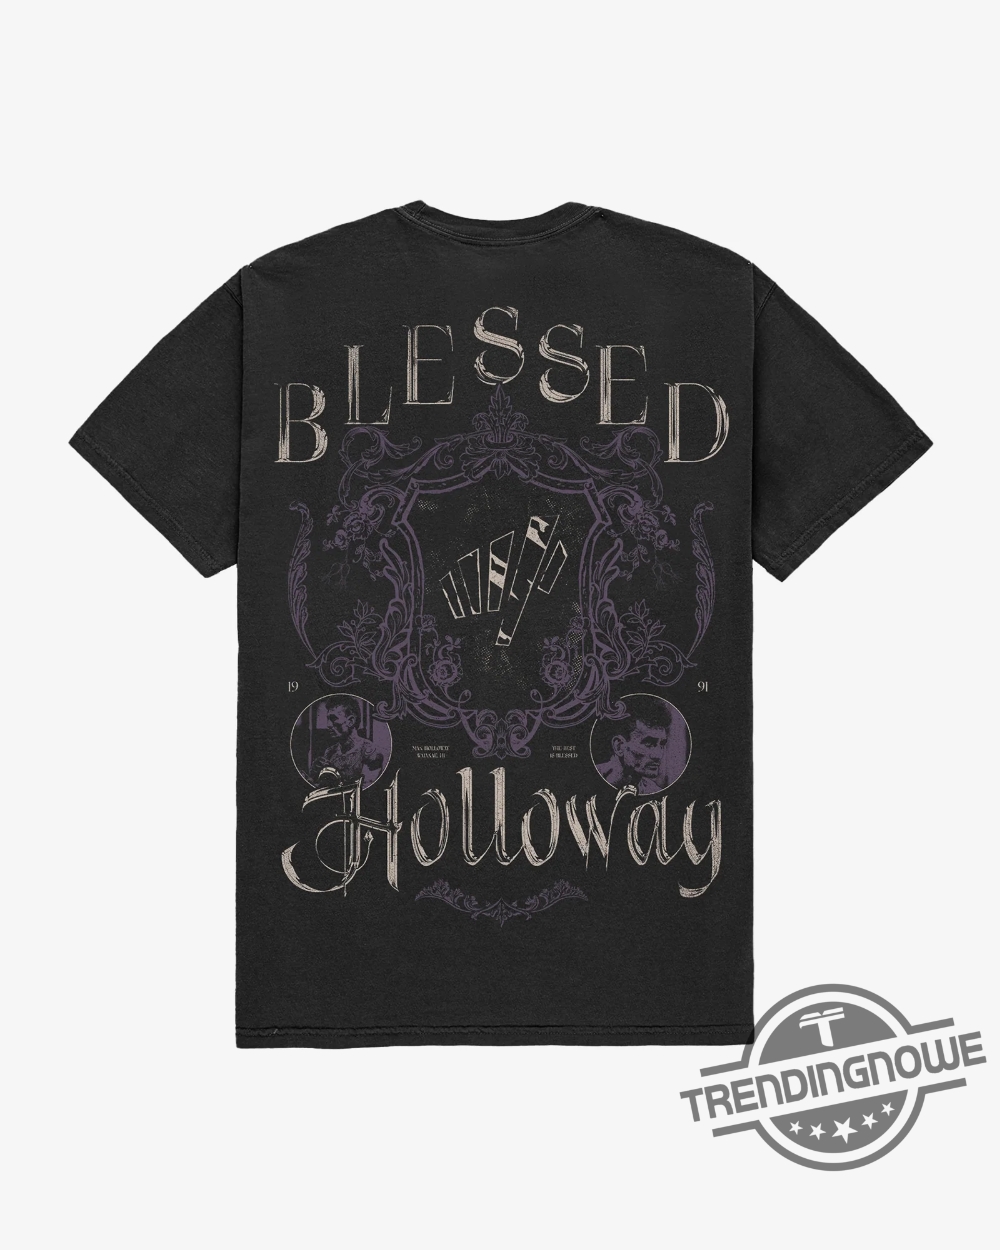 Max Holloway Shirt Blessed Holloway Vintage Shirt Holloway 300 T Shirt Sweatshirt Hoodie